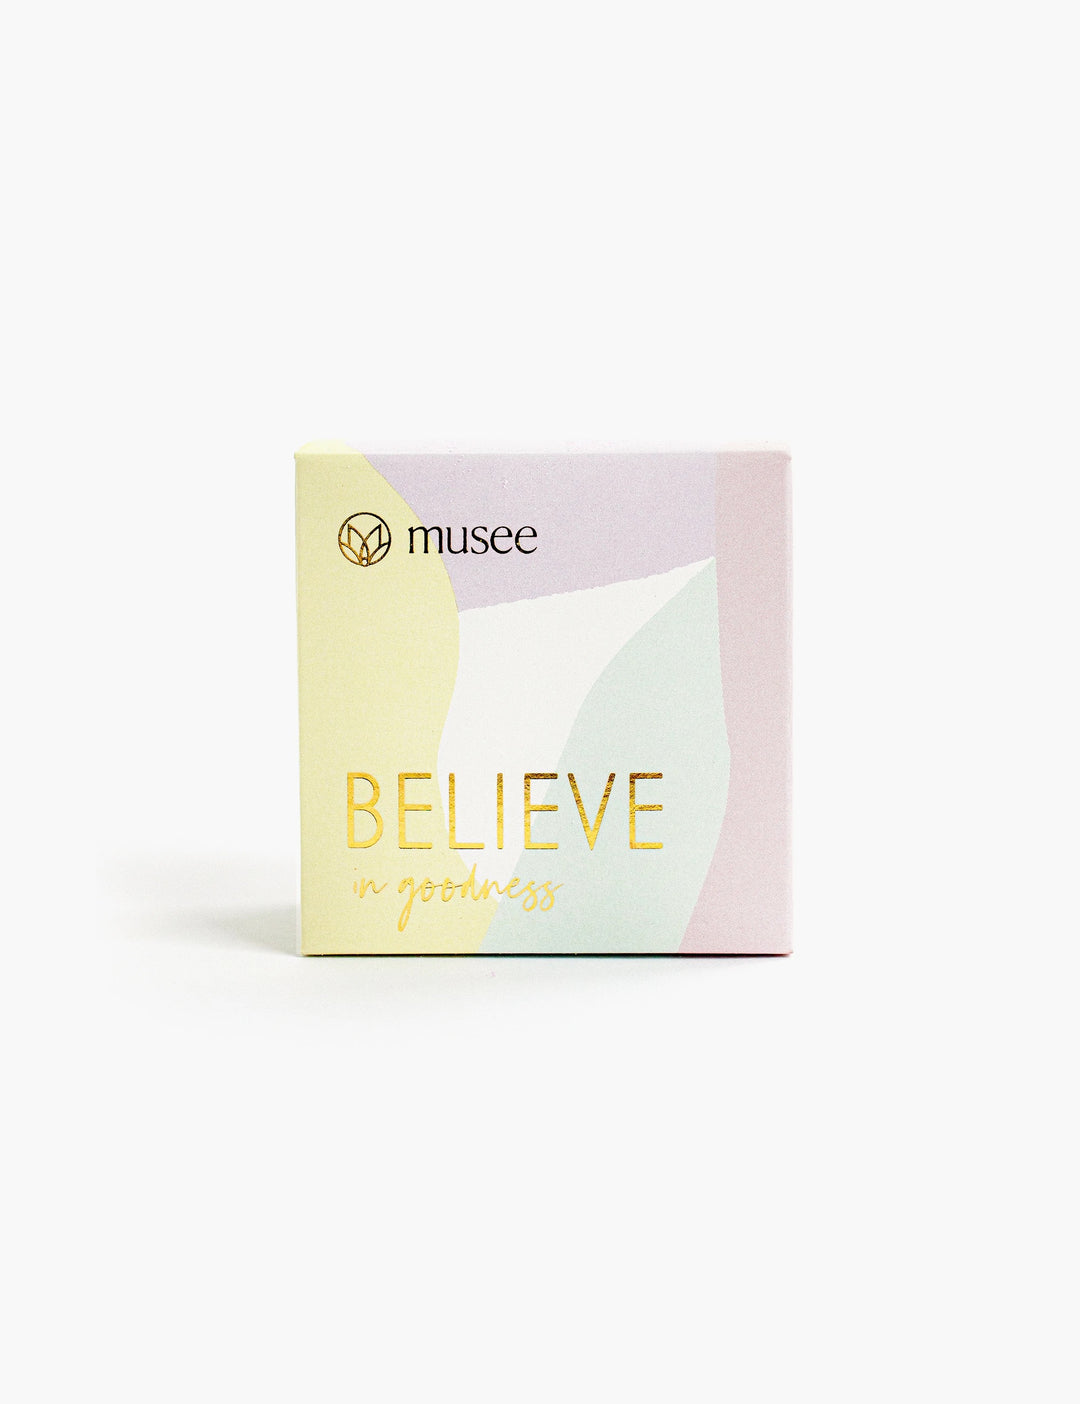 Musee Believe in Goodness Bar Soap